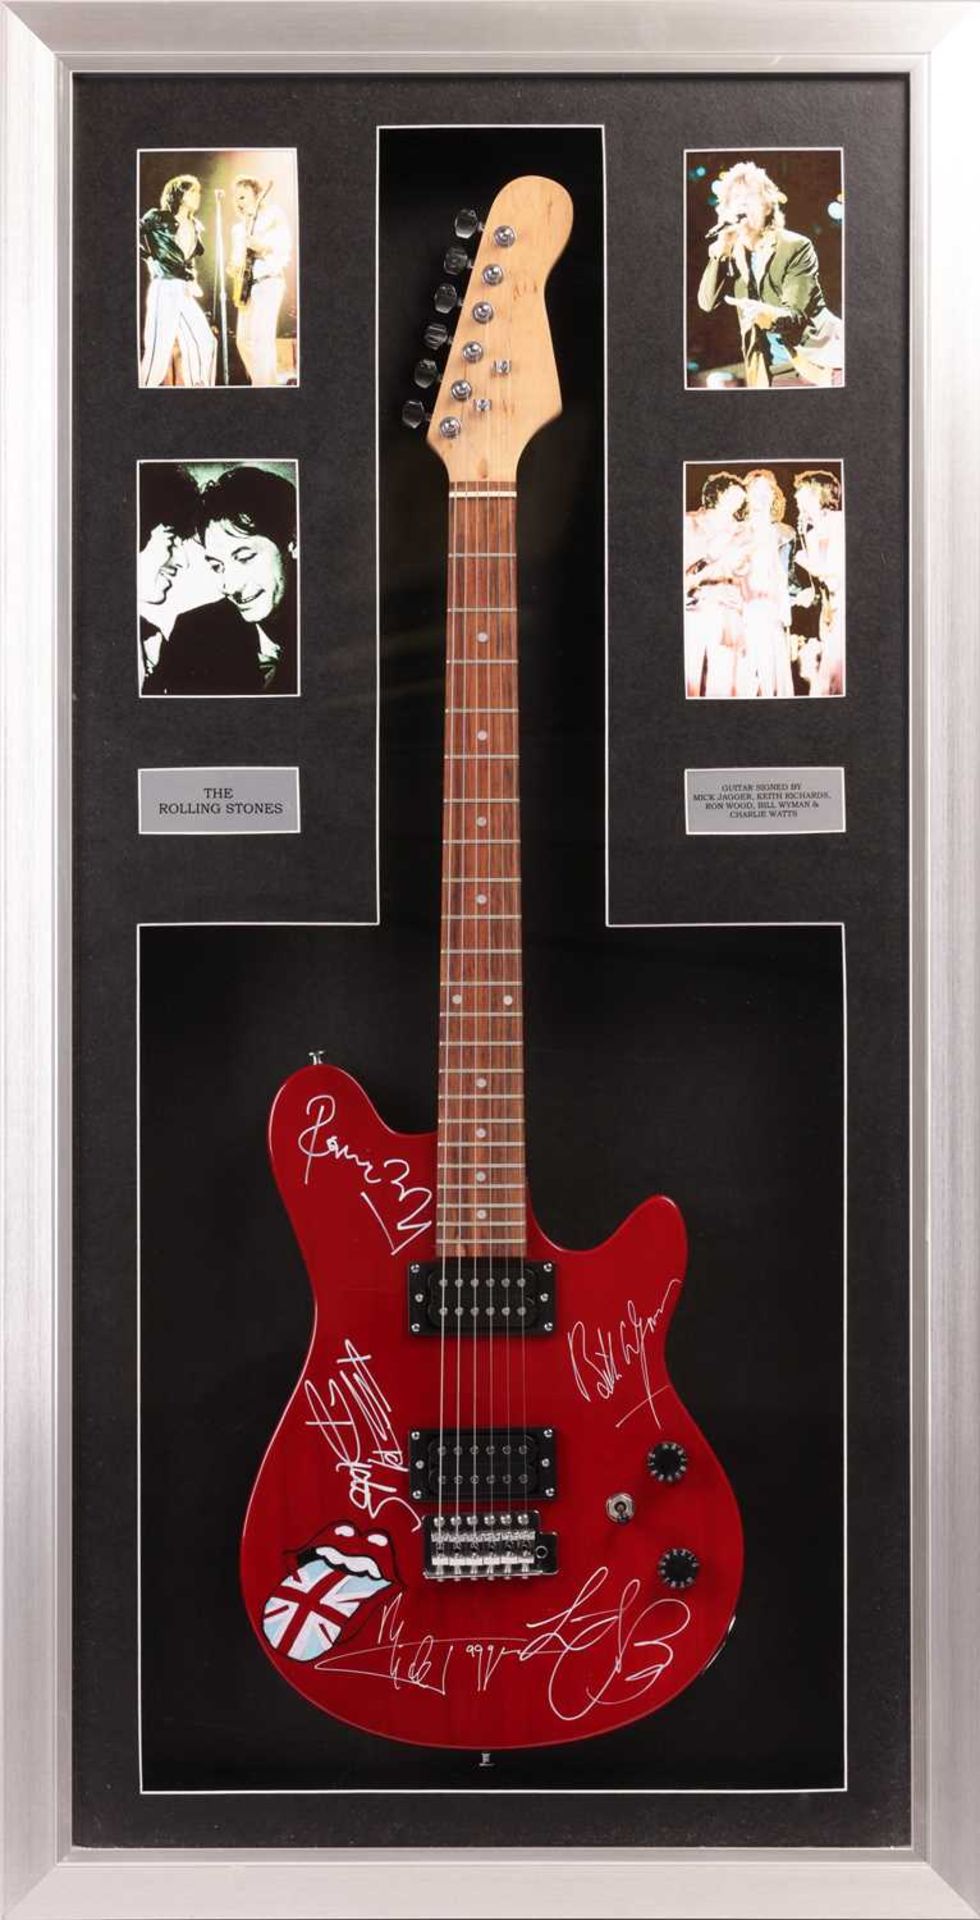 The Rolling Stones: an electric guitar signed by Mick Jagger, Ronnie Wood, Keith Richards, Bill Wyma - Image 2 of 14